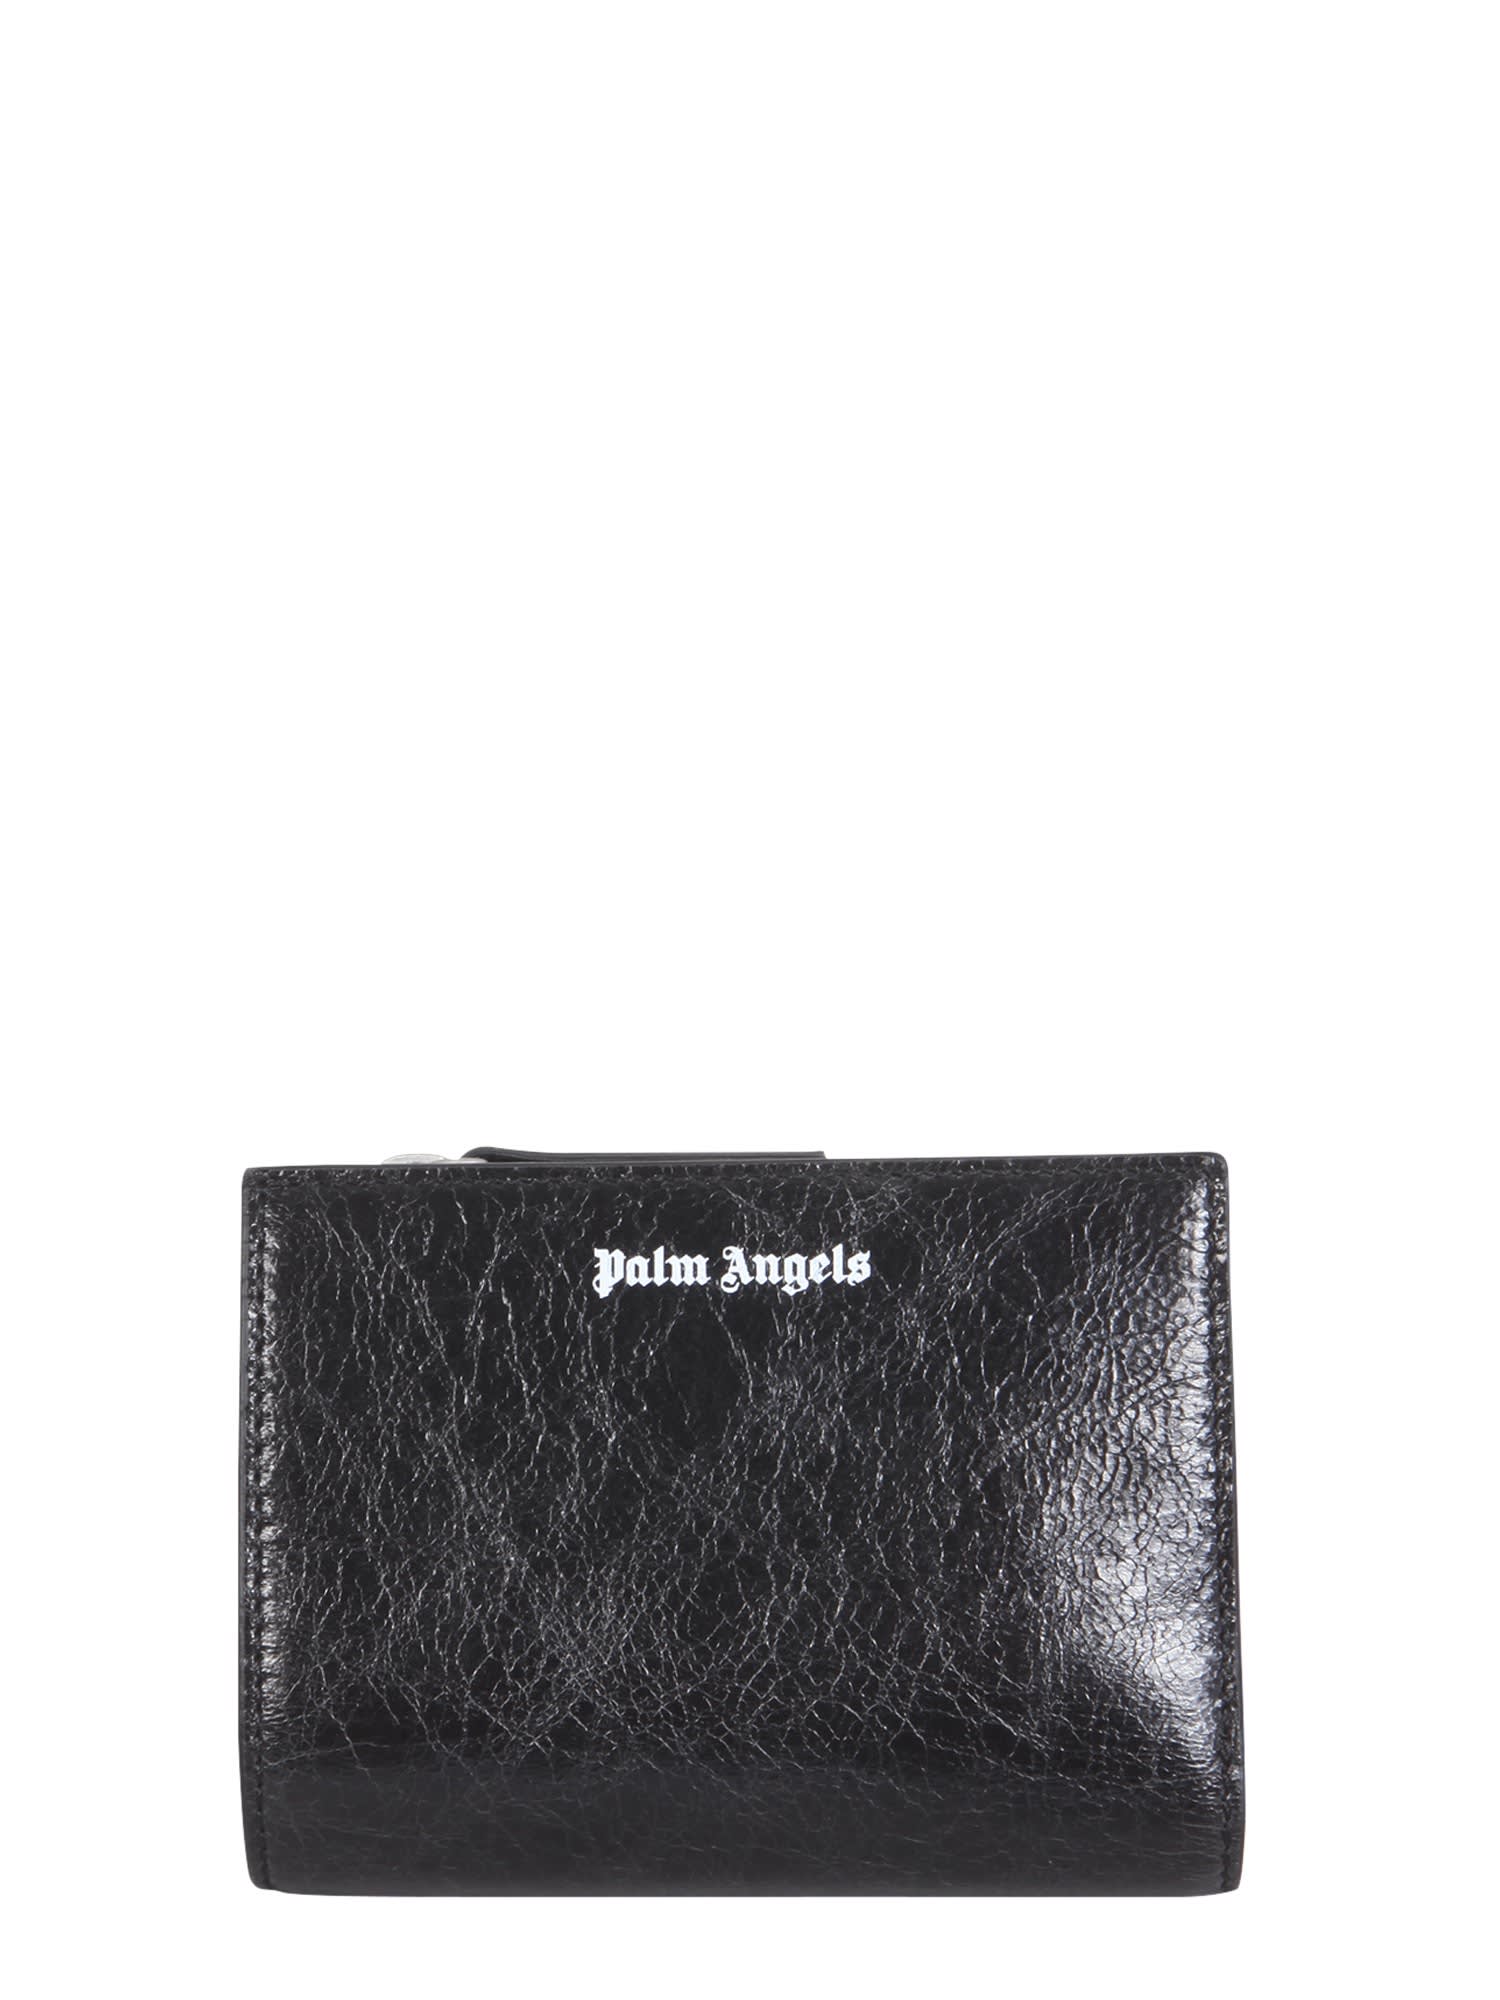 Palm Angels Leather Wallet